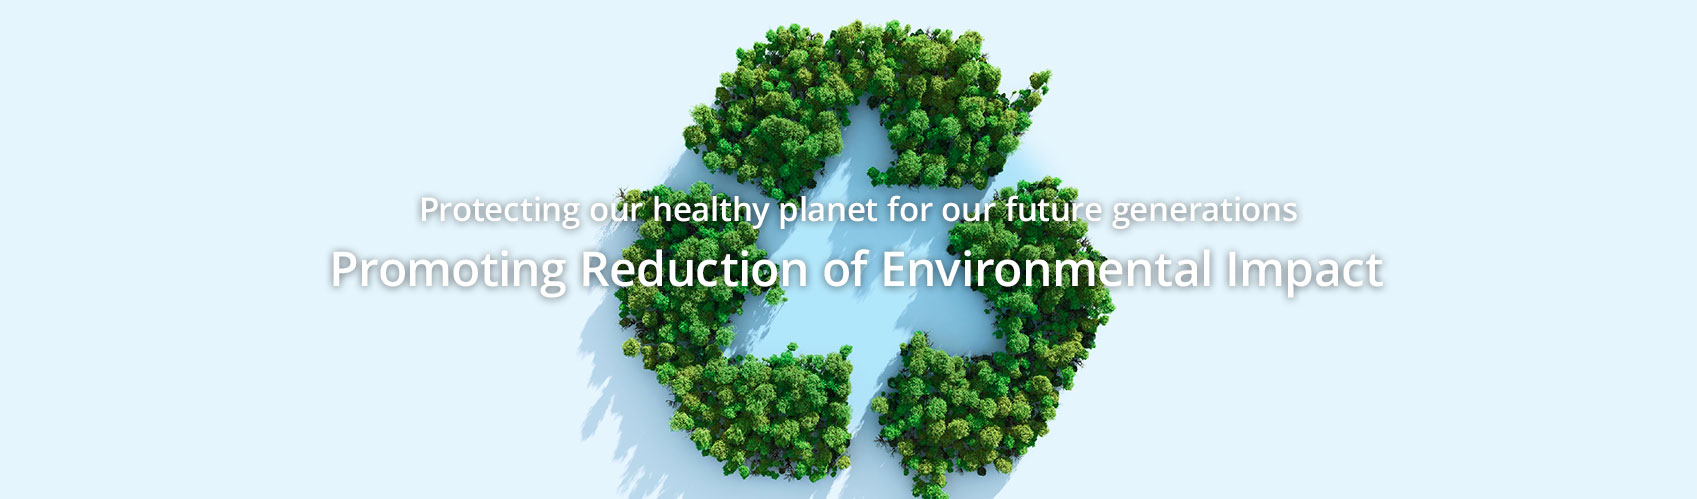 Protecting our healthy planet for our future generations Promoting Reduction of Environmental Impact